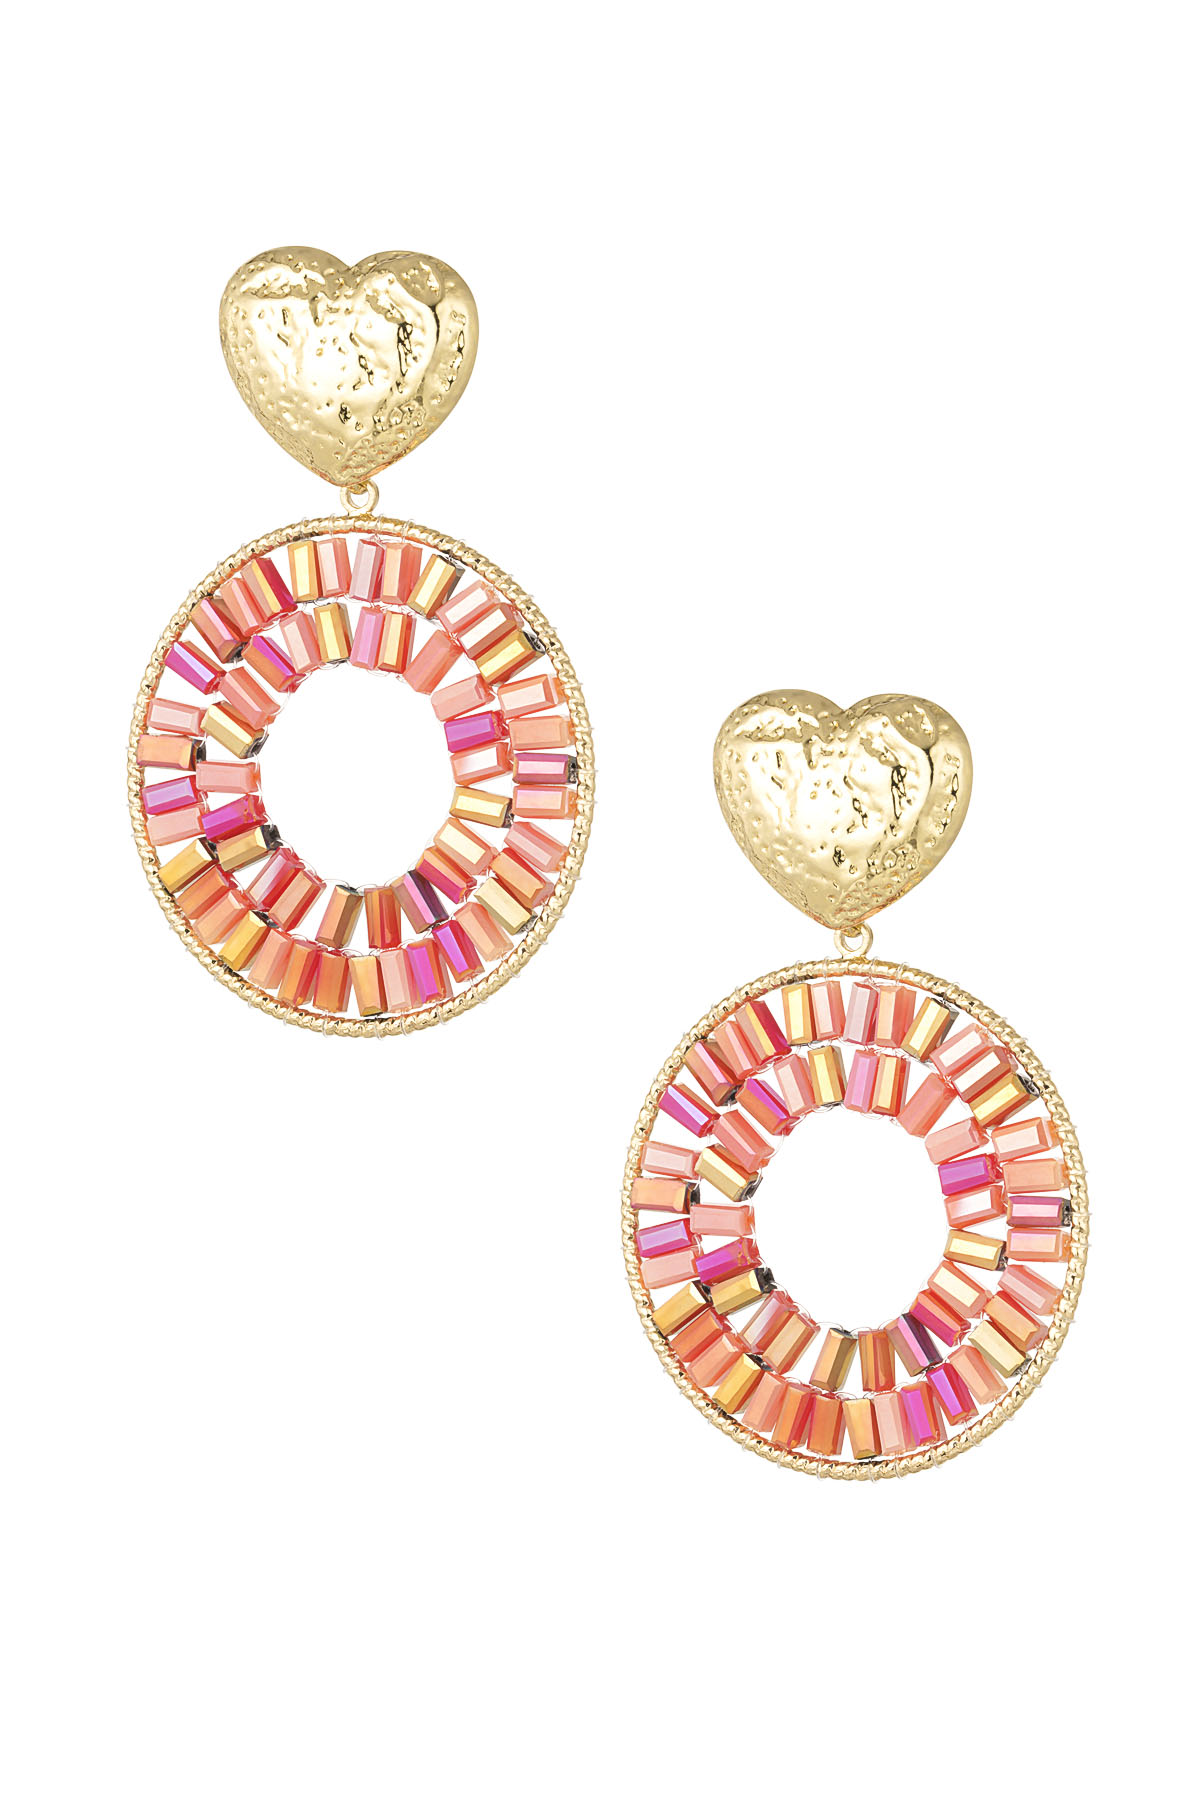 Round statement earrings with heart detail - red